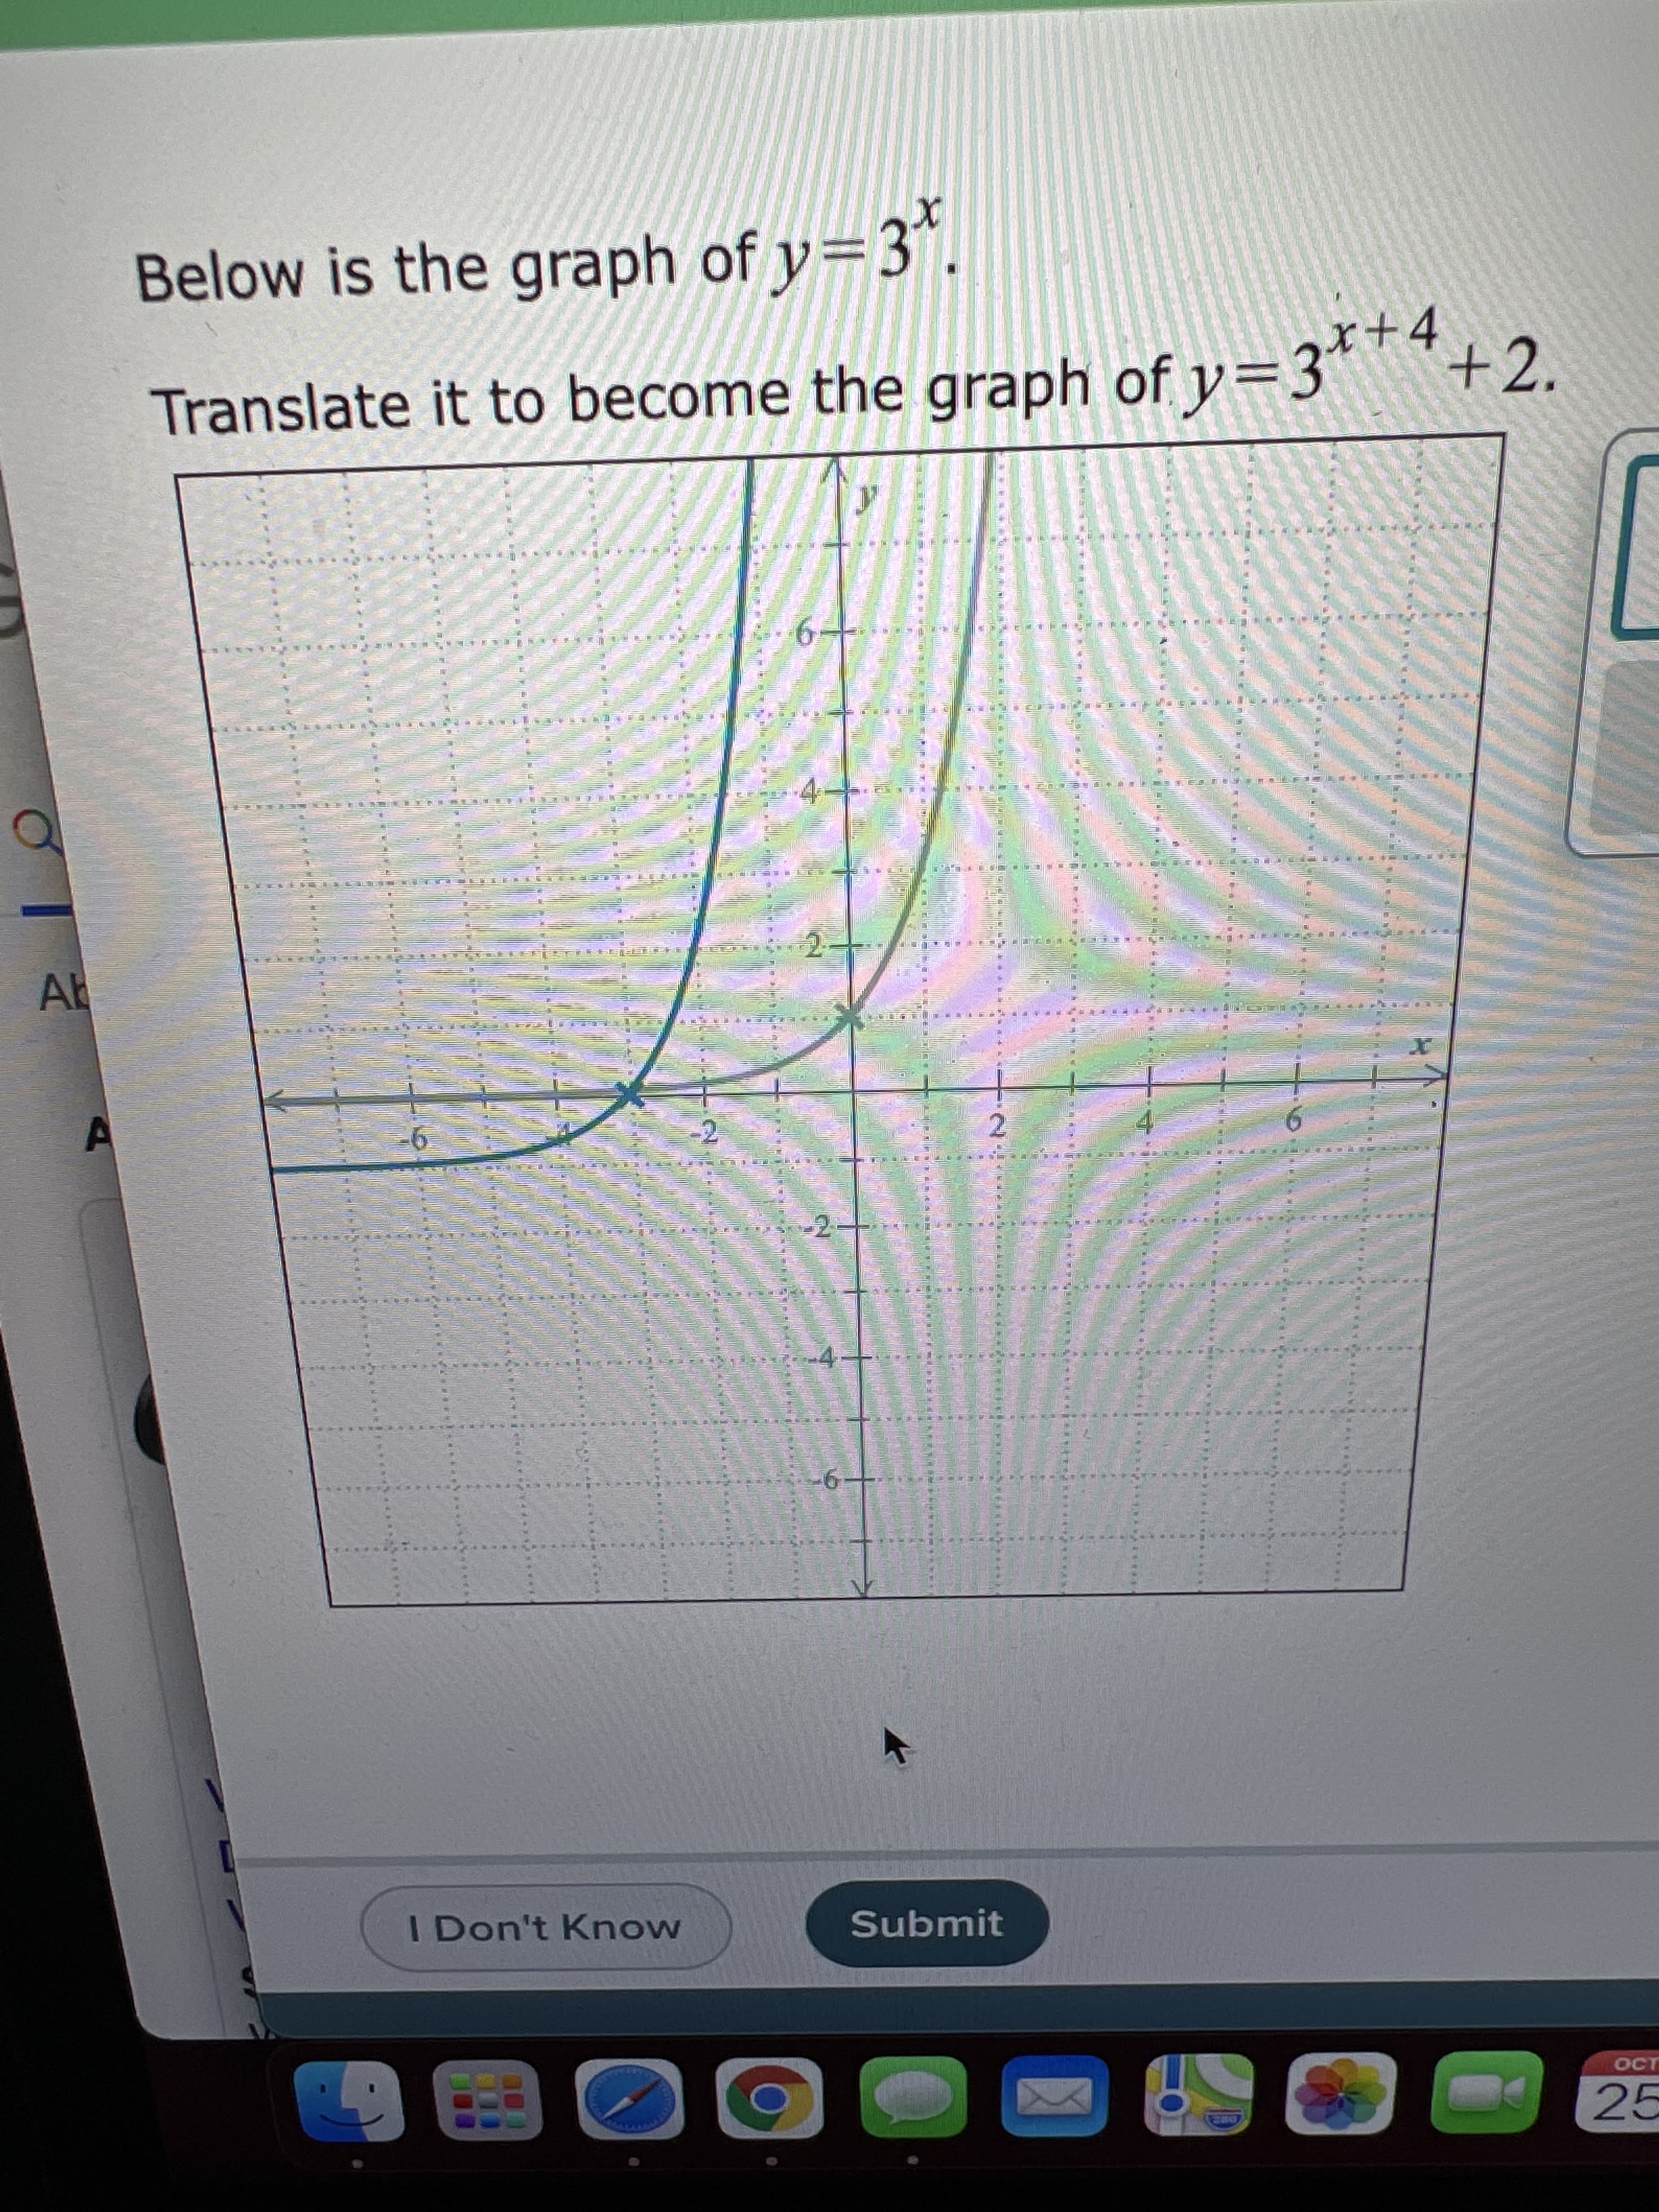 E
ll
Below is the graph of y=3".
Translate it to become the graph of y=3*™*.
4
+2.
EHI NER
RE F ER ES NISA
3 a E E ED
Ab
EF EES
2.
-4-
I Don't Know
Submit
OCT
25
DRE
